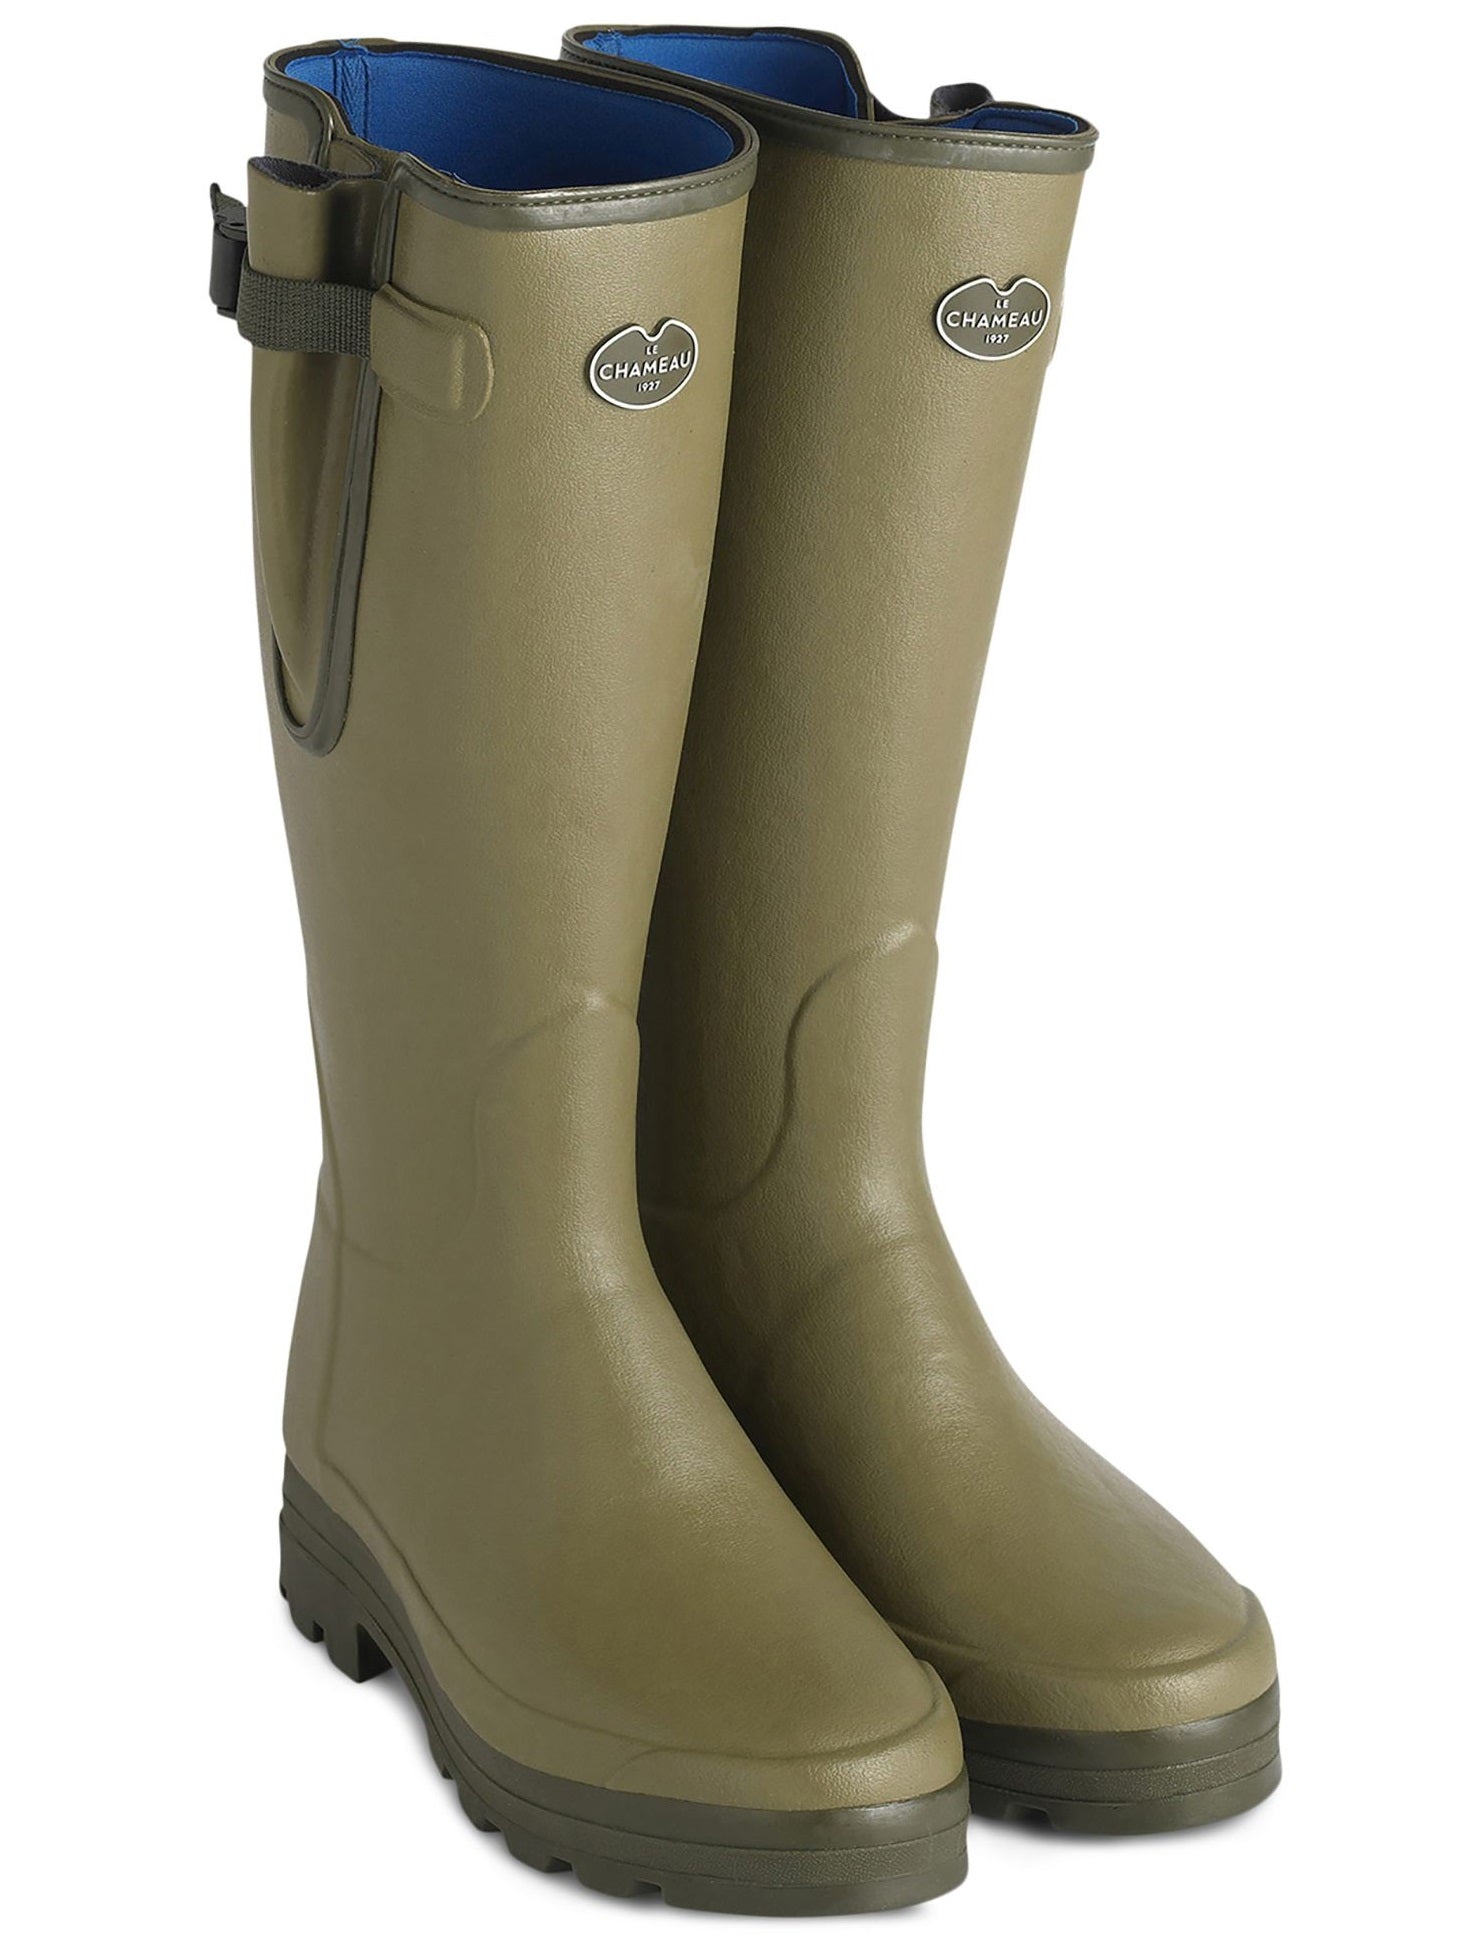 LE CHAMEAU Vierzonord Boots - Mens Neoprene Lined - Iconic Green